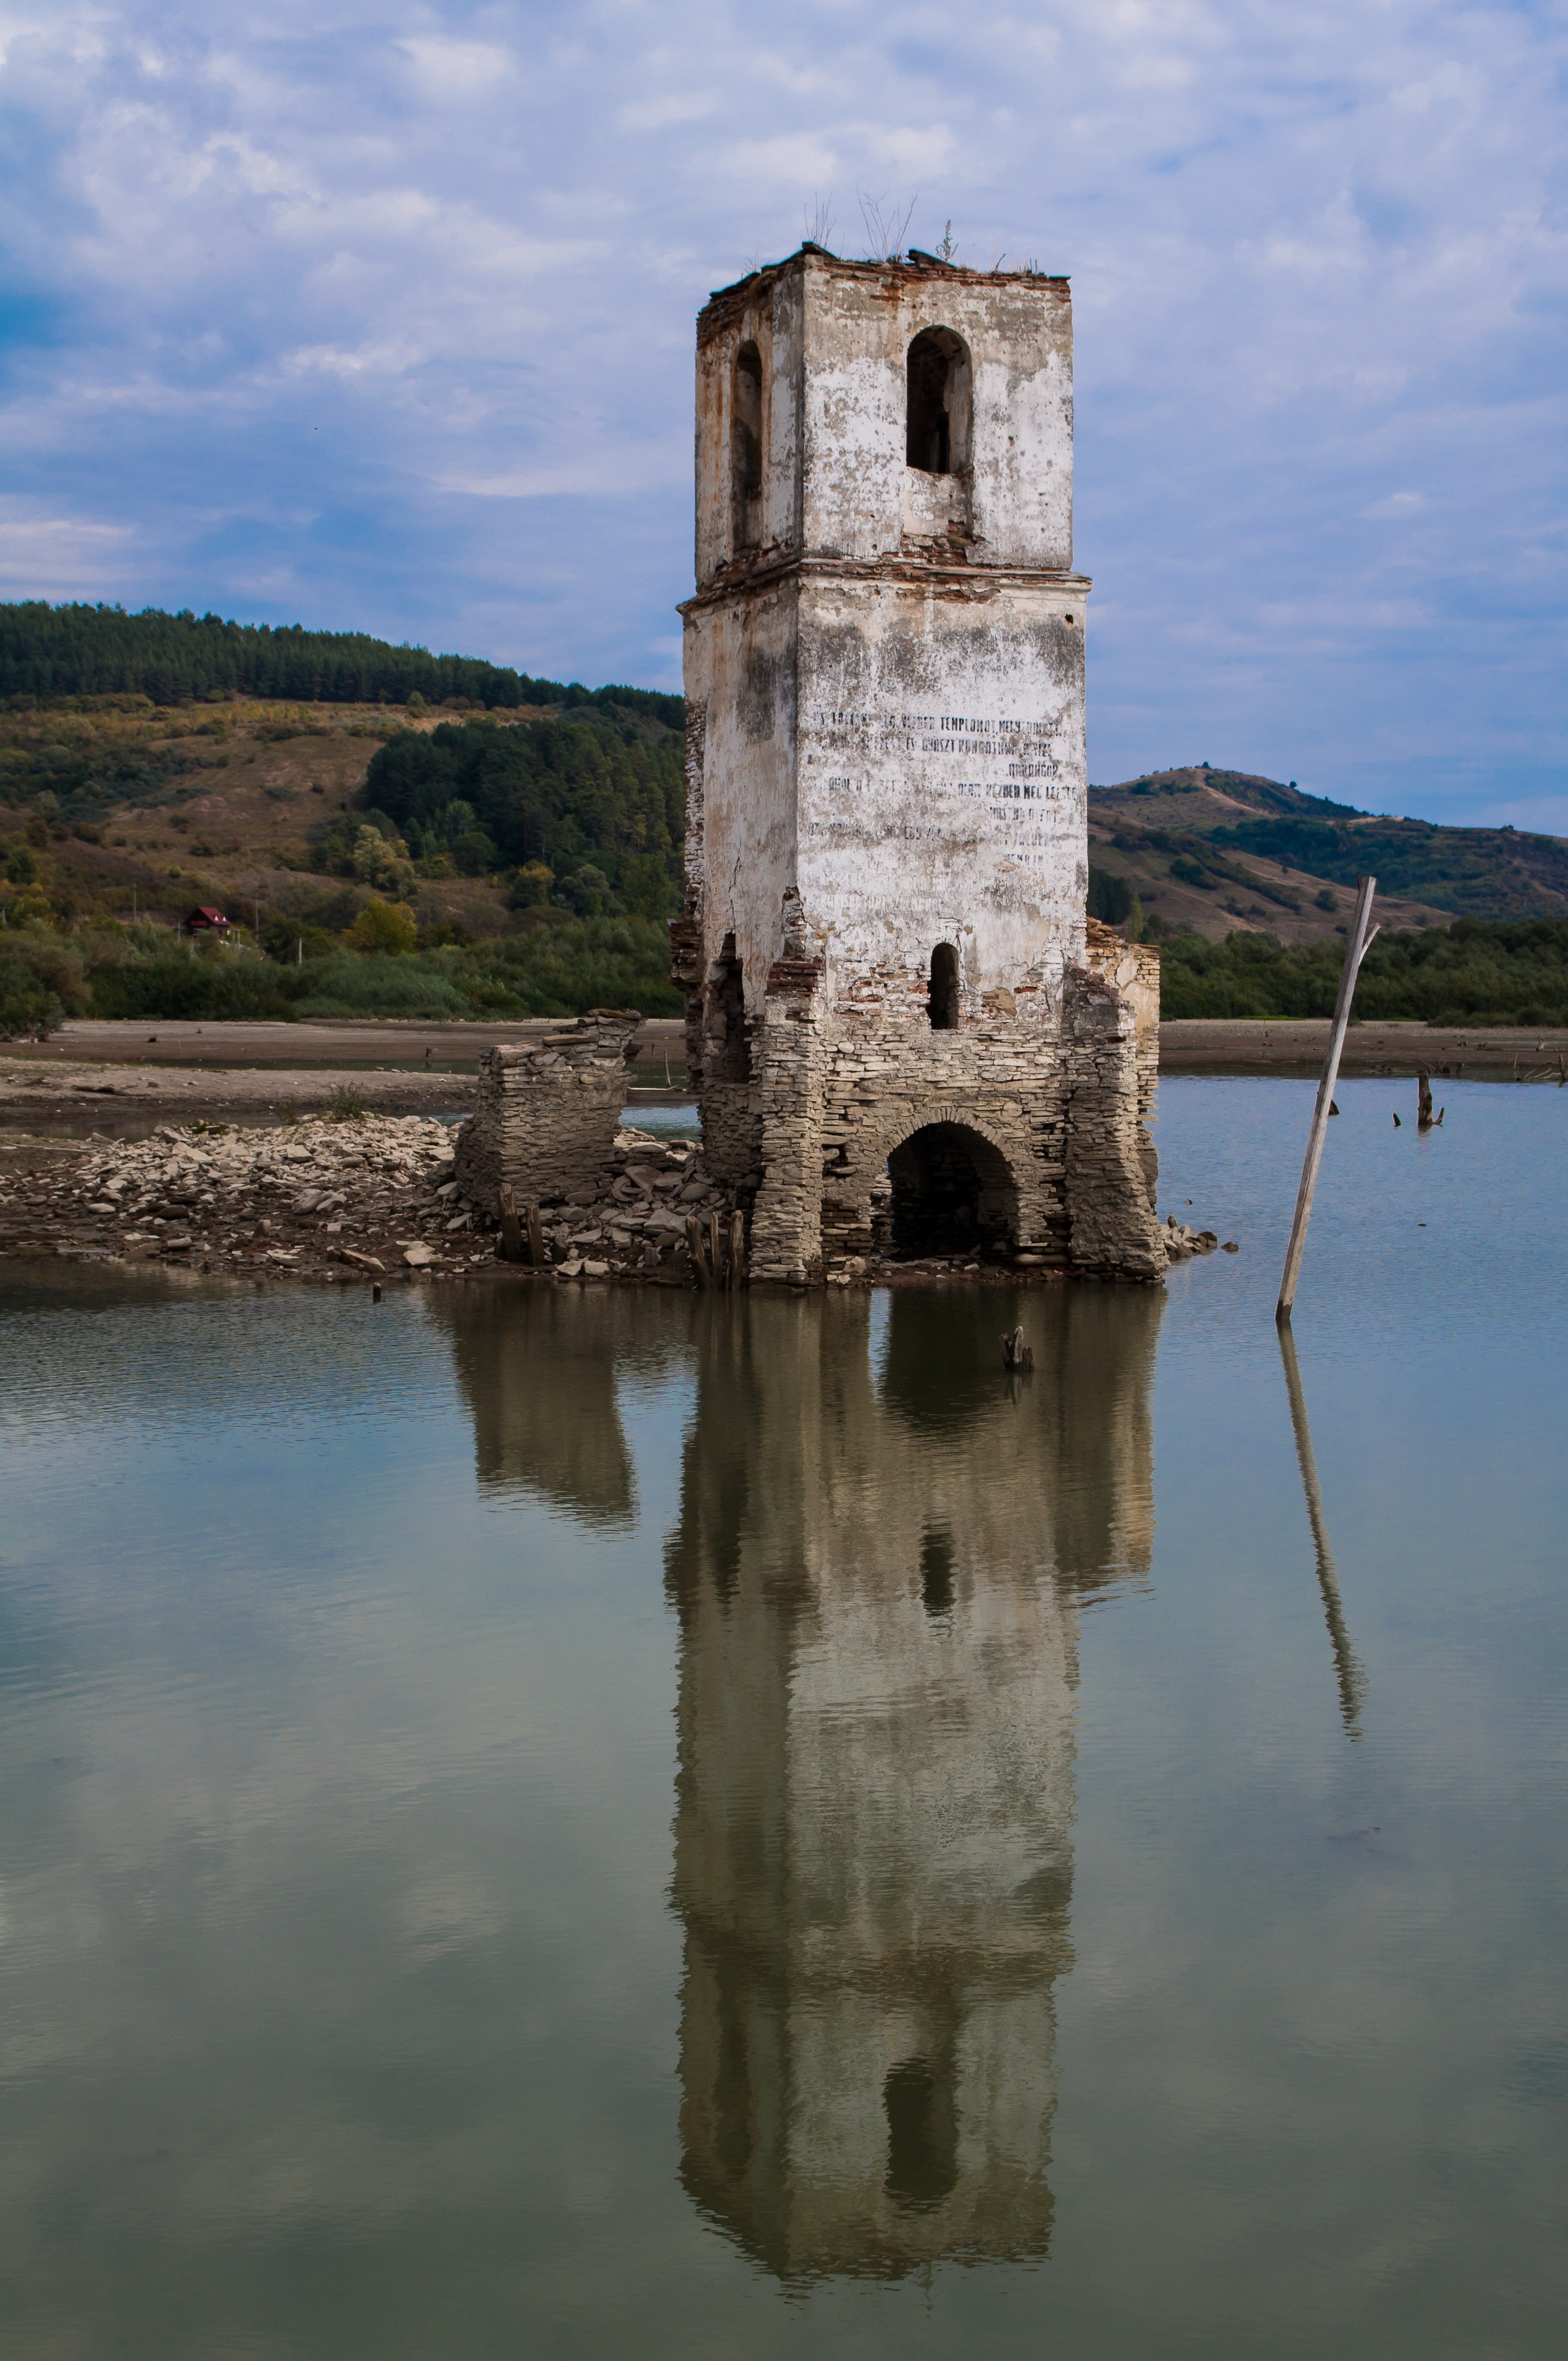 grey and white stone tower beside body of water